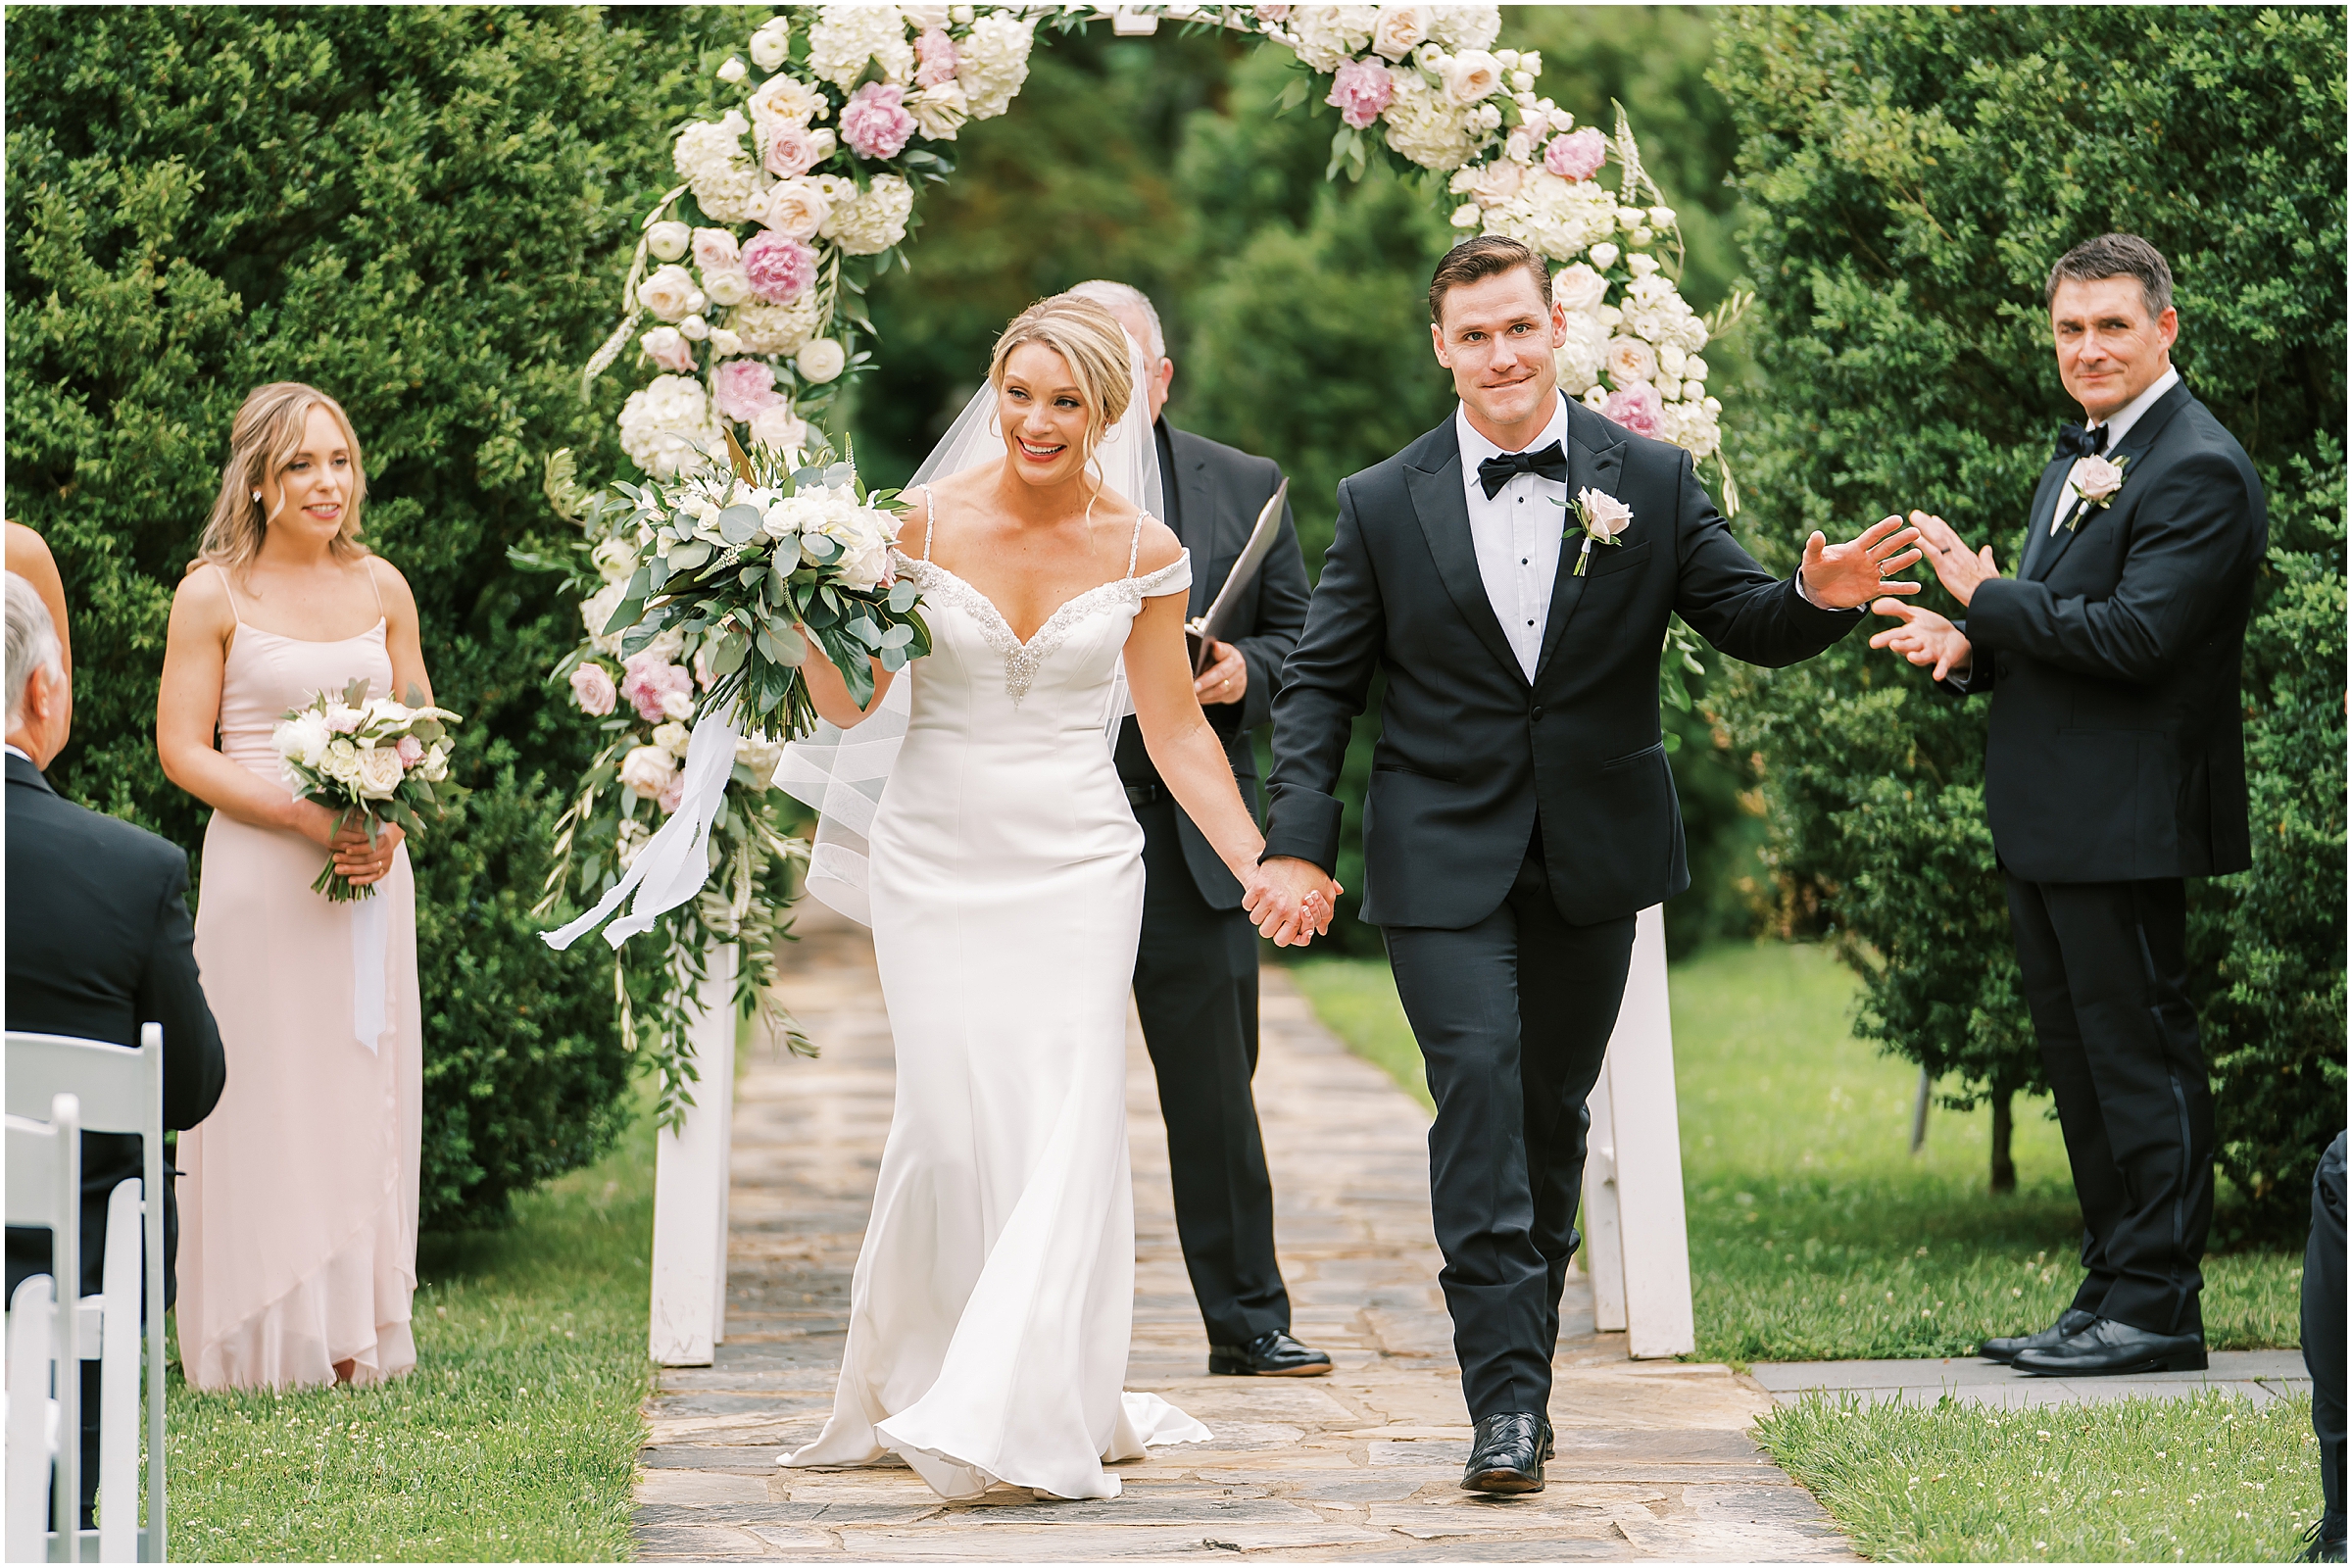 Wedding recessional at Rust Manor House